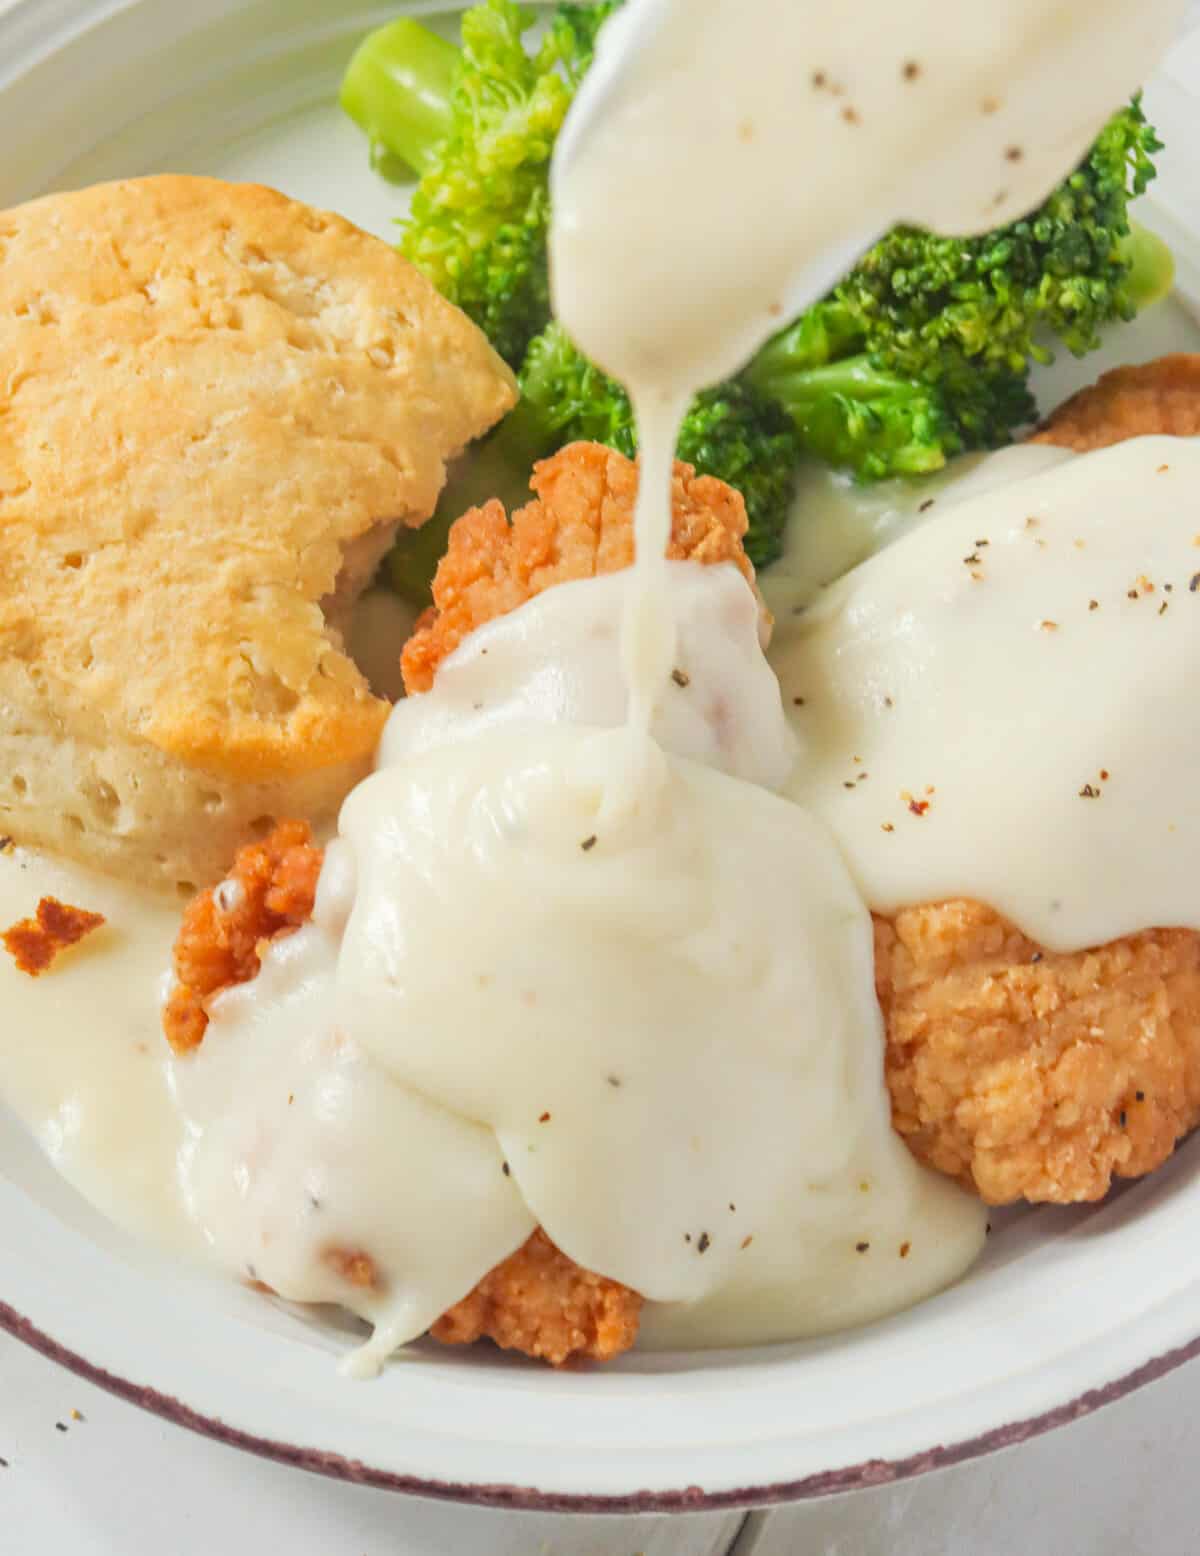 Drizzling rich white gravy over fried chicken and biscuits